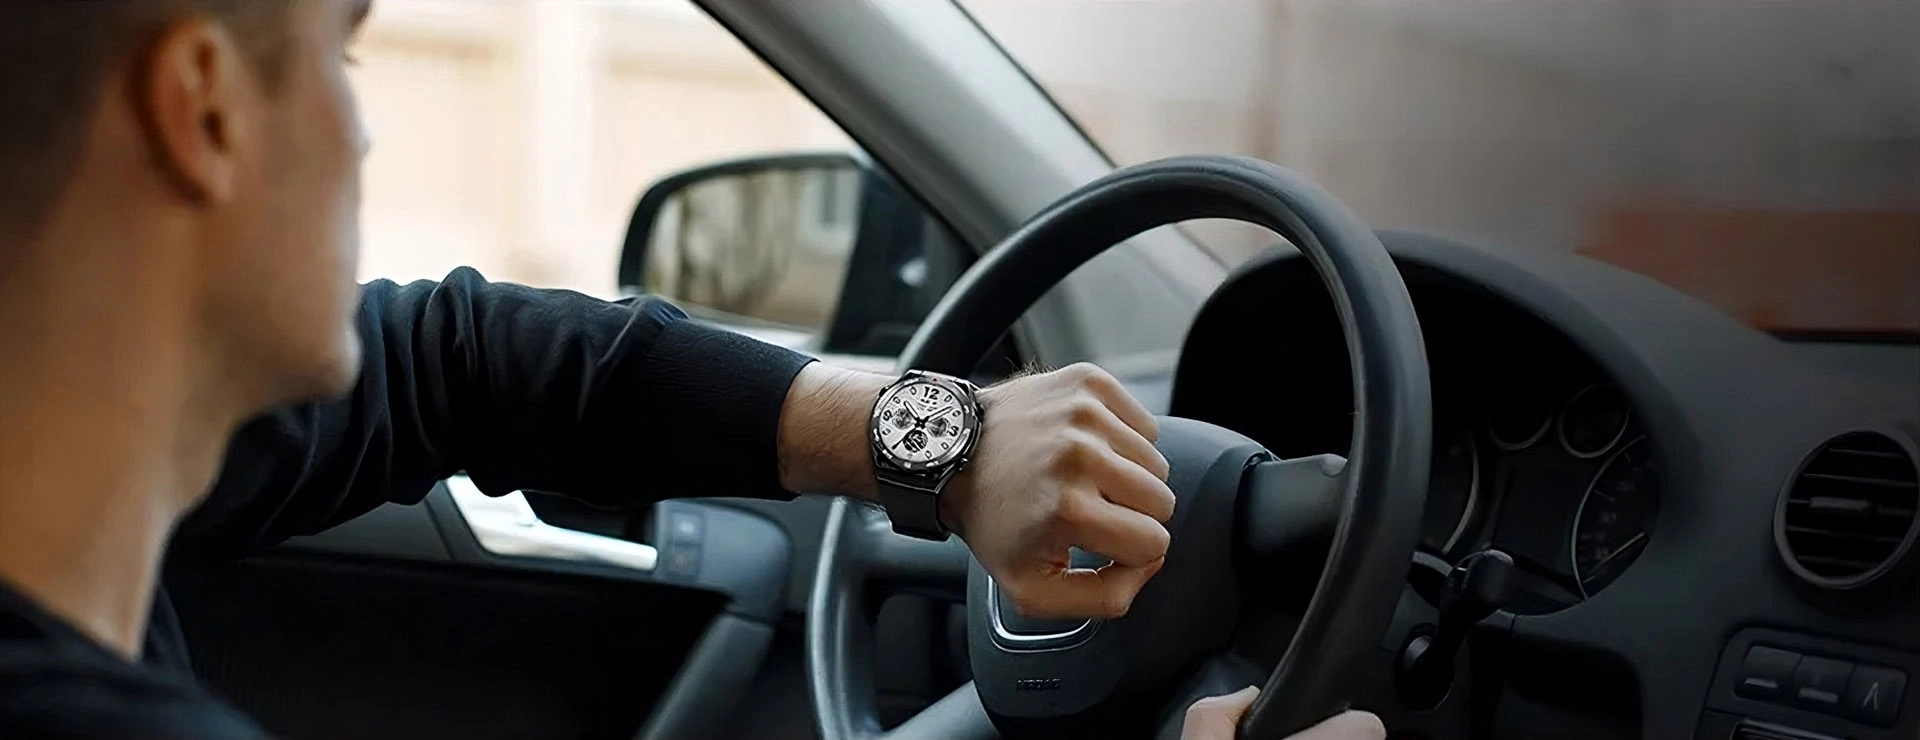 Haylou Watch R8 on a driver's wrist